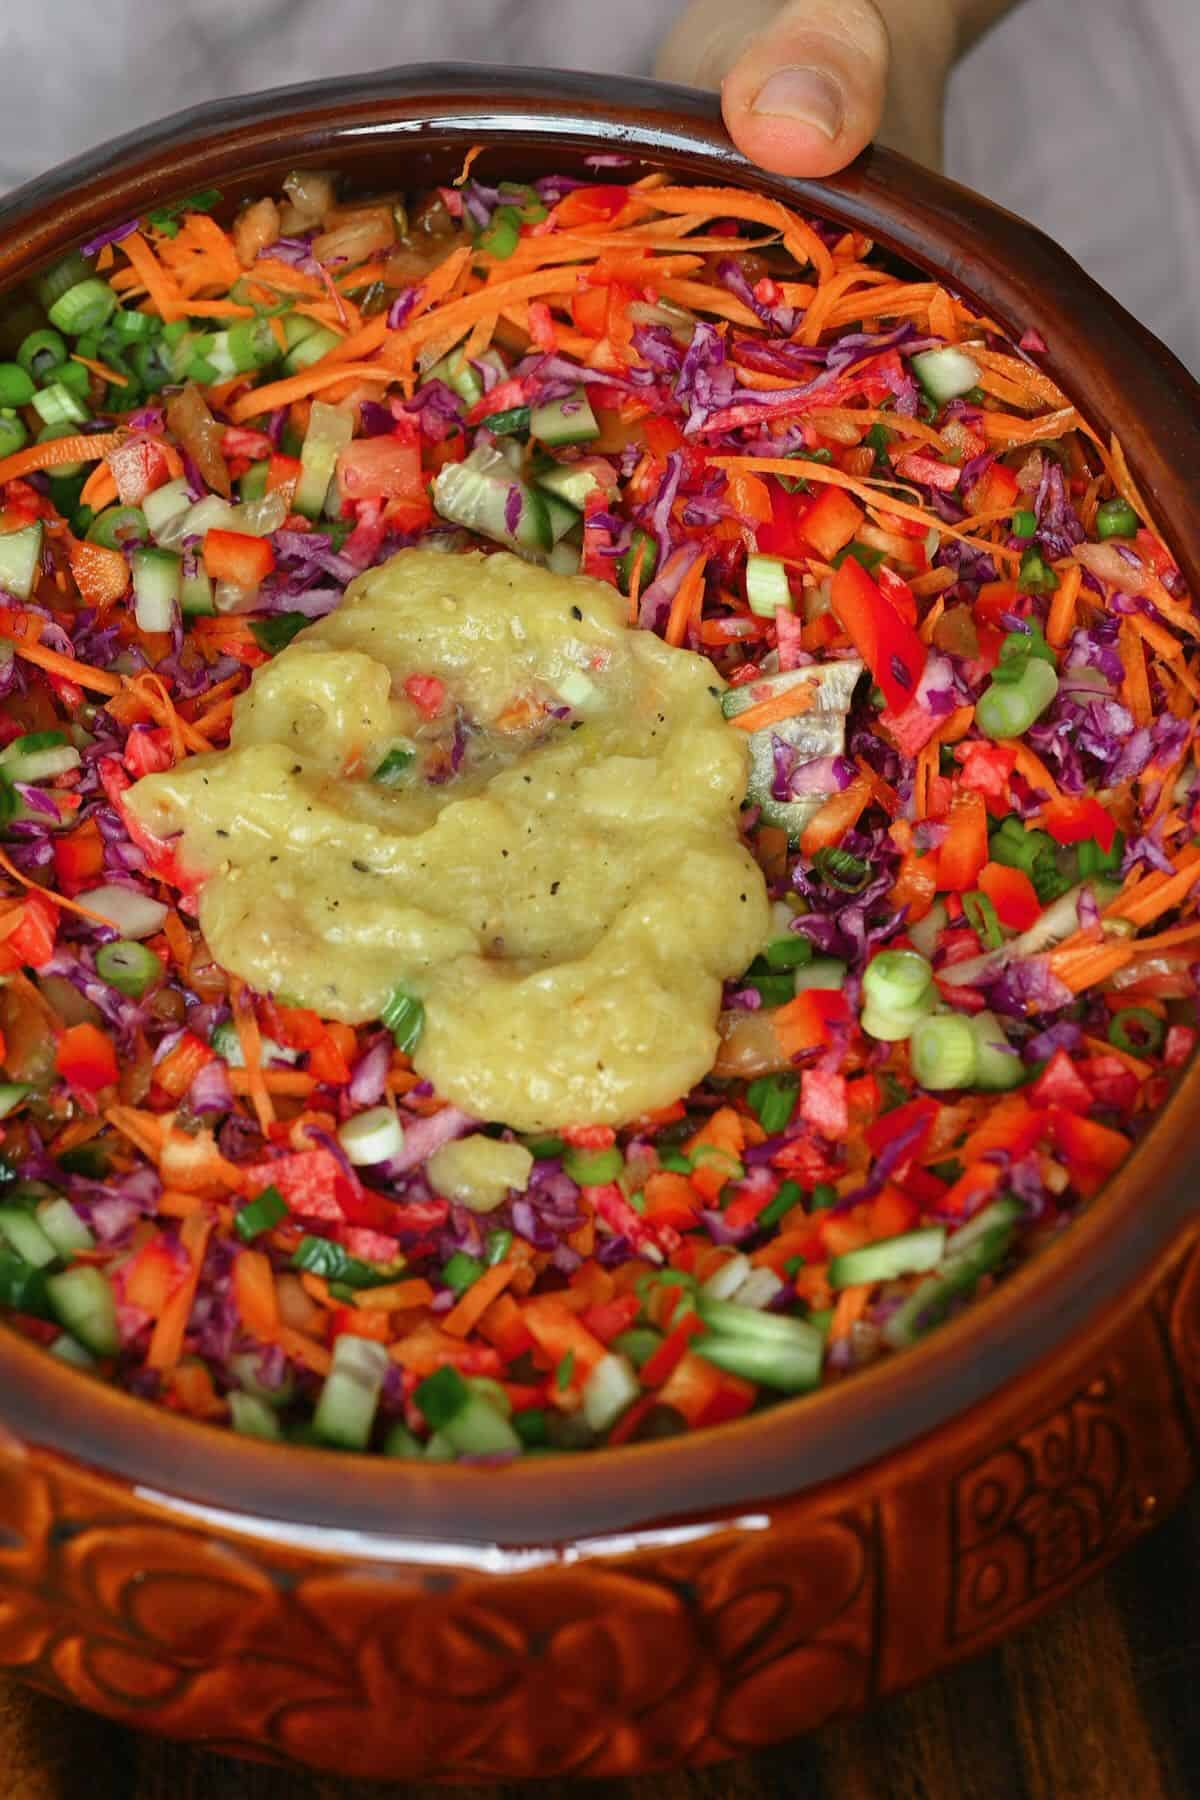 Rainbow cabbage salad topped with roasted garlic dressing